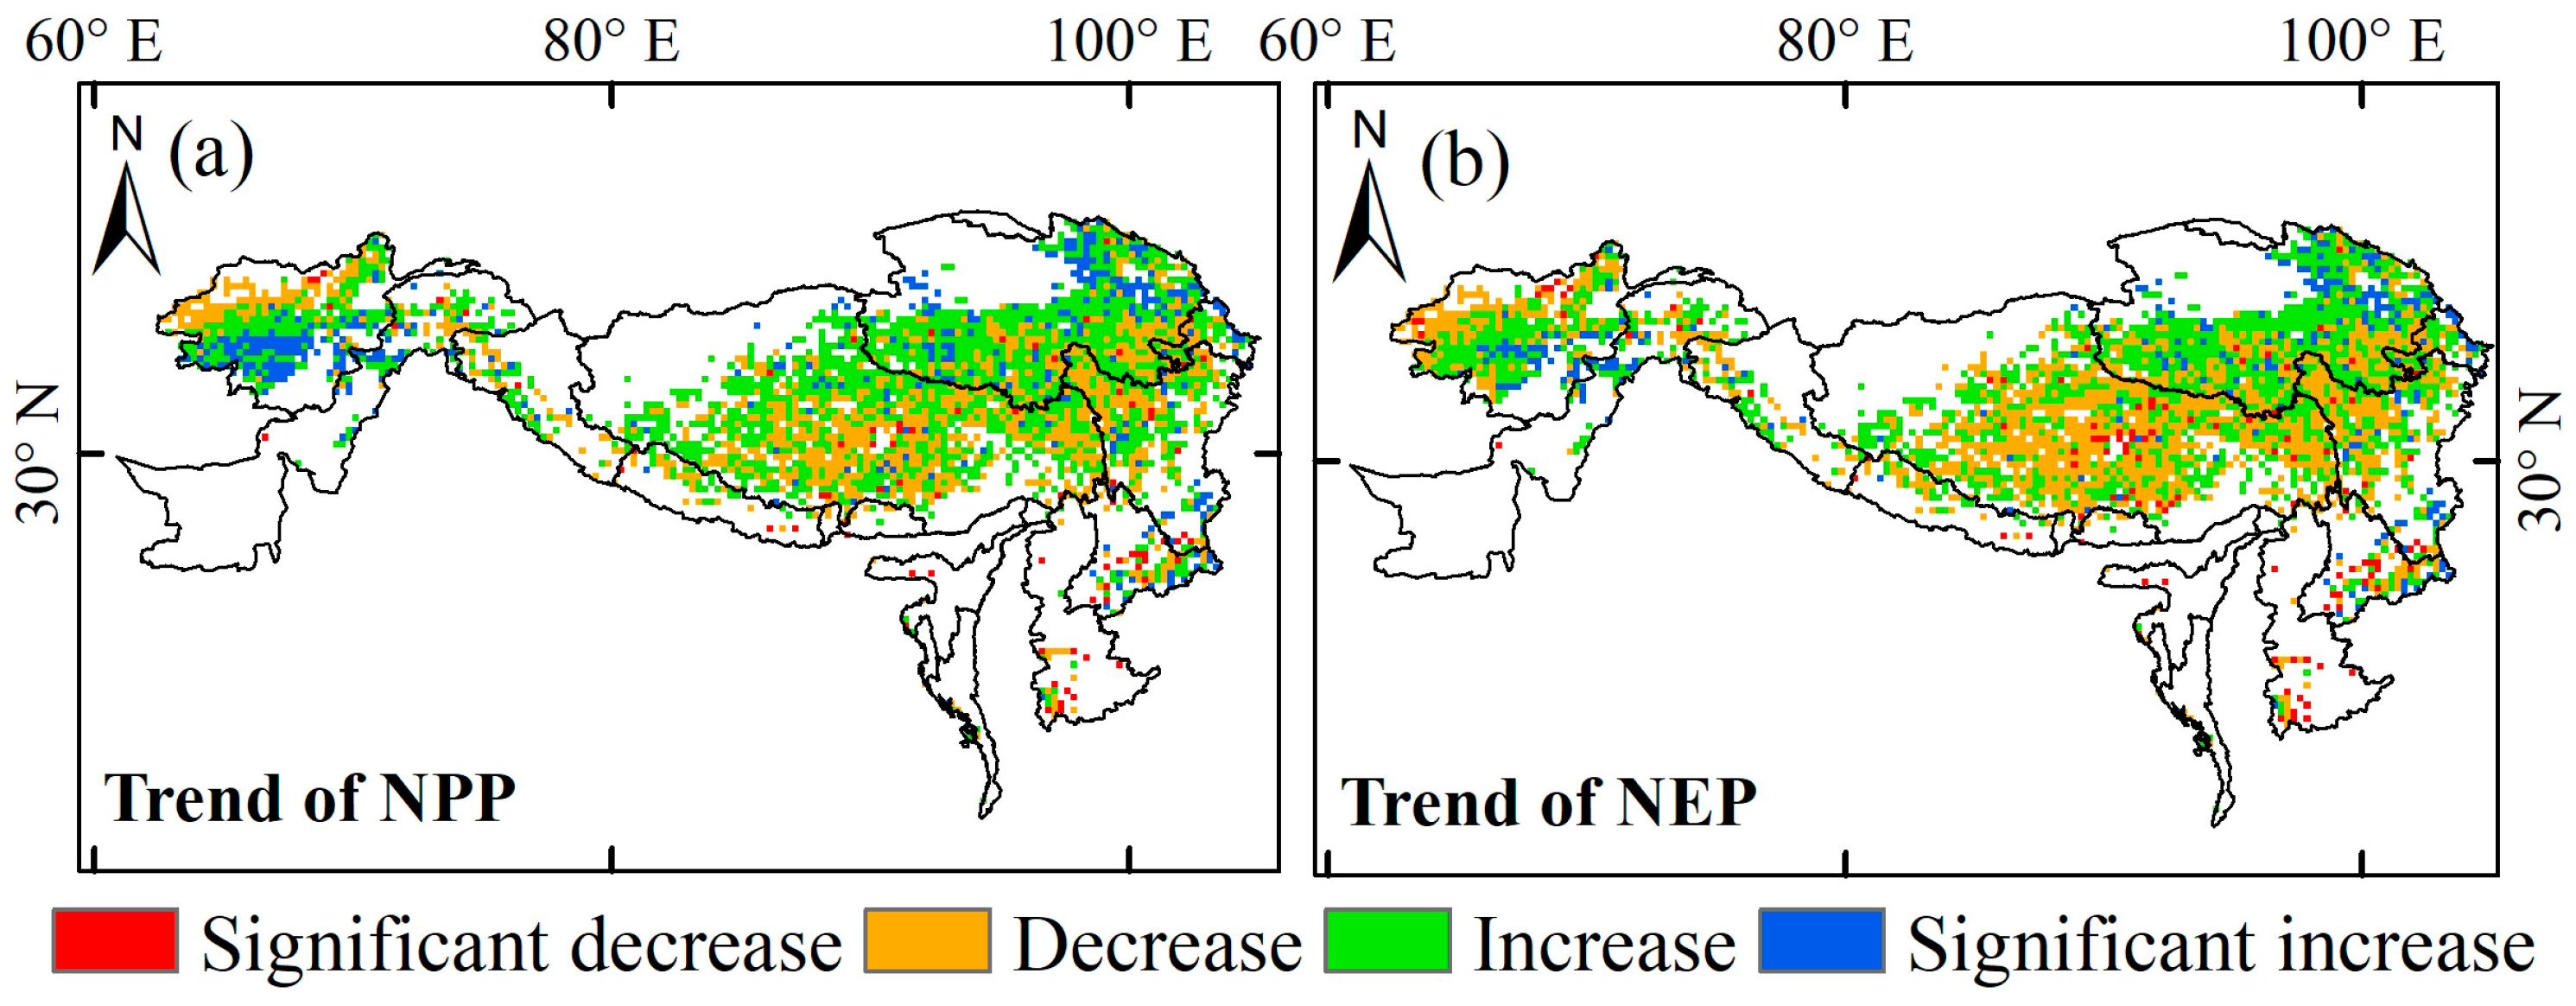 Remote Sensing | Free Full-Text | Large-Scale Analysis of the  Spatiotemporal Changes of Net Ecosystem Production in Hindu Kush Himalayan  Region | HTML